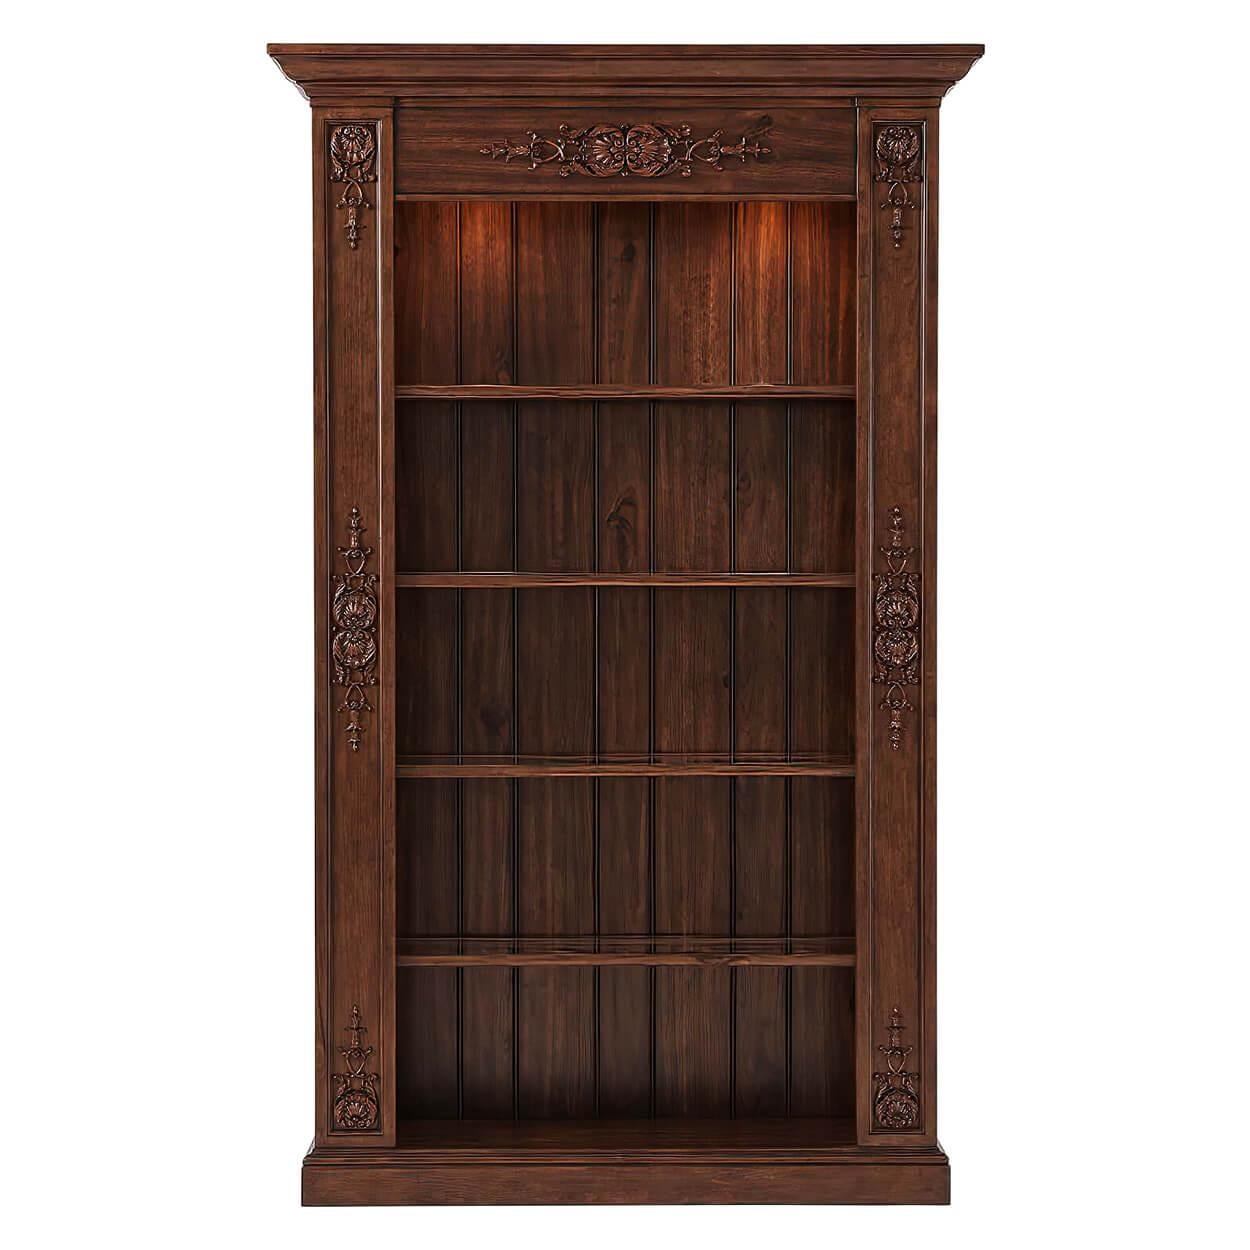 A French walnut open bookcase with a molded cornice with carved shell and leaf medallion panels, with LED lit interior and glass inset wood framed shelves. The rear panels with planked detail and raised on a square and stepped plinth base.